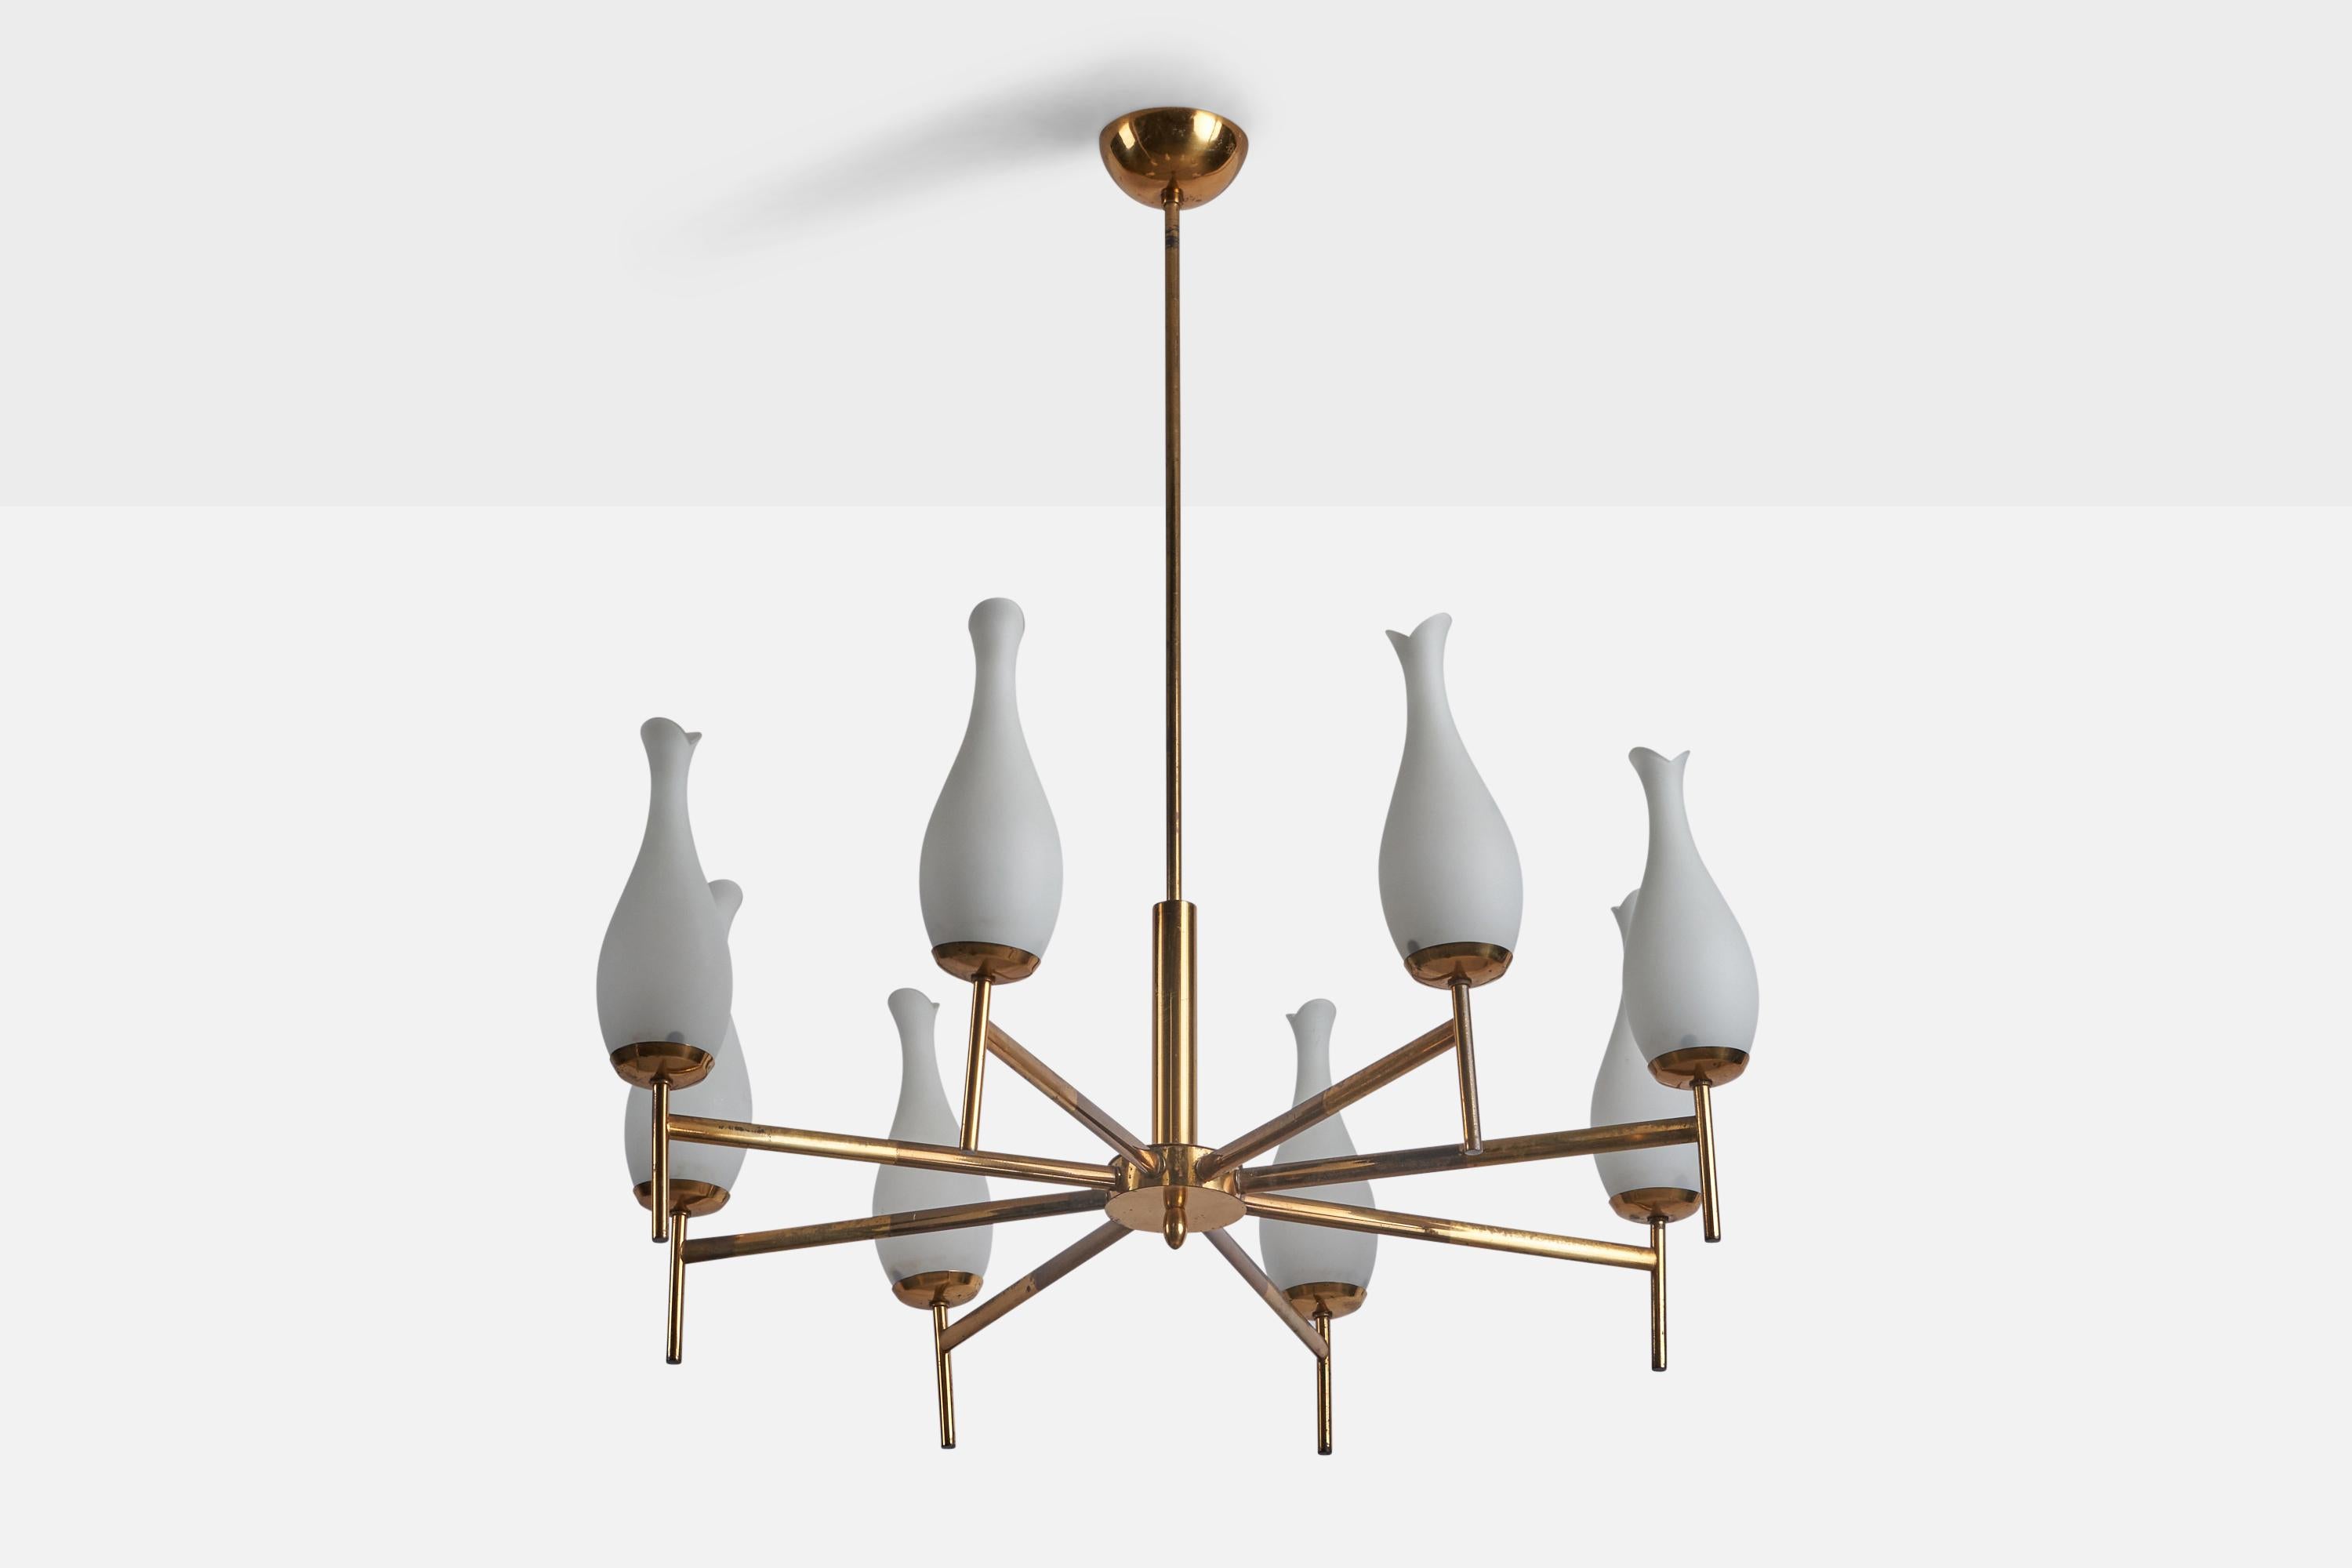 An eight-armed brass and opaline glass chandelier designed and produced in Italy, c. 1950s.

Overall Dimensions (inches): 30.5” H x 29” Diameter
Bulb Specifications: E-14 Bulb
Number of Sockets: 8